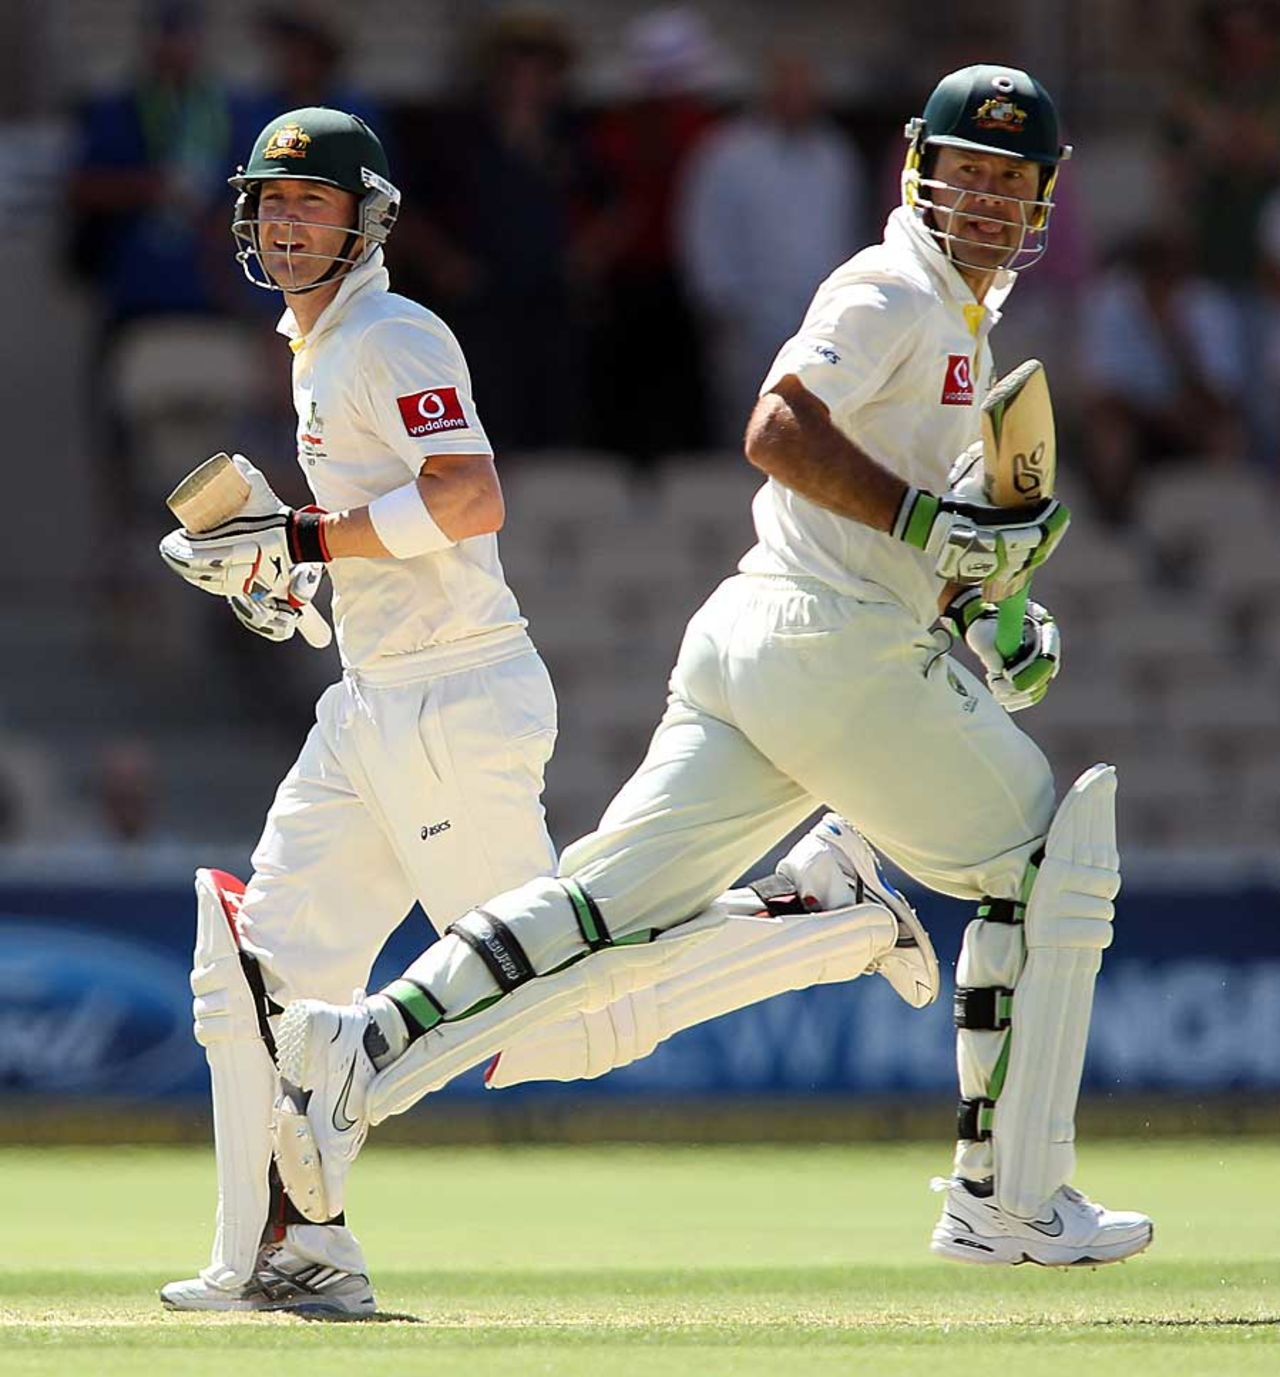 Michael Clarke and Ricky Ponting take a single, Australia v India, 4th Test, Adelaide, 4th day, January 27, 2012